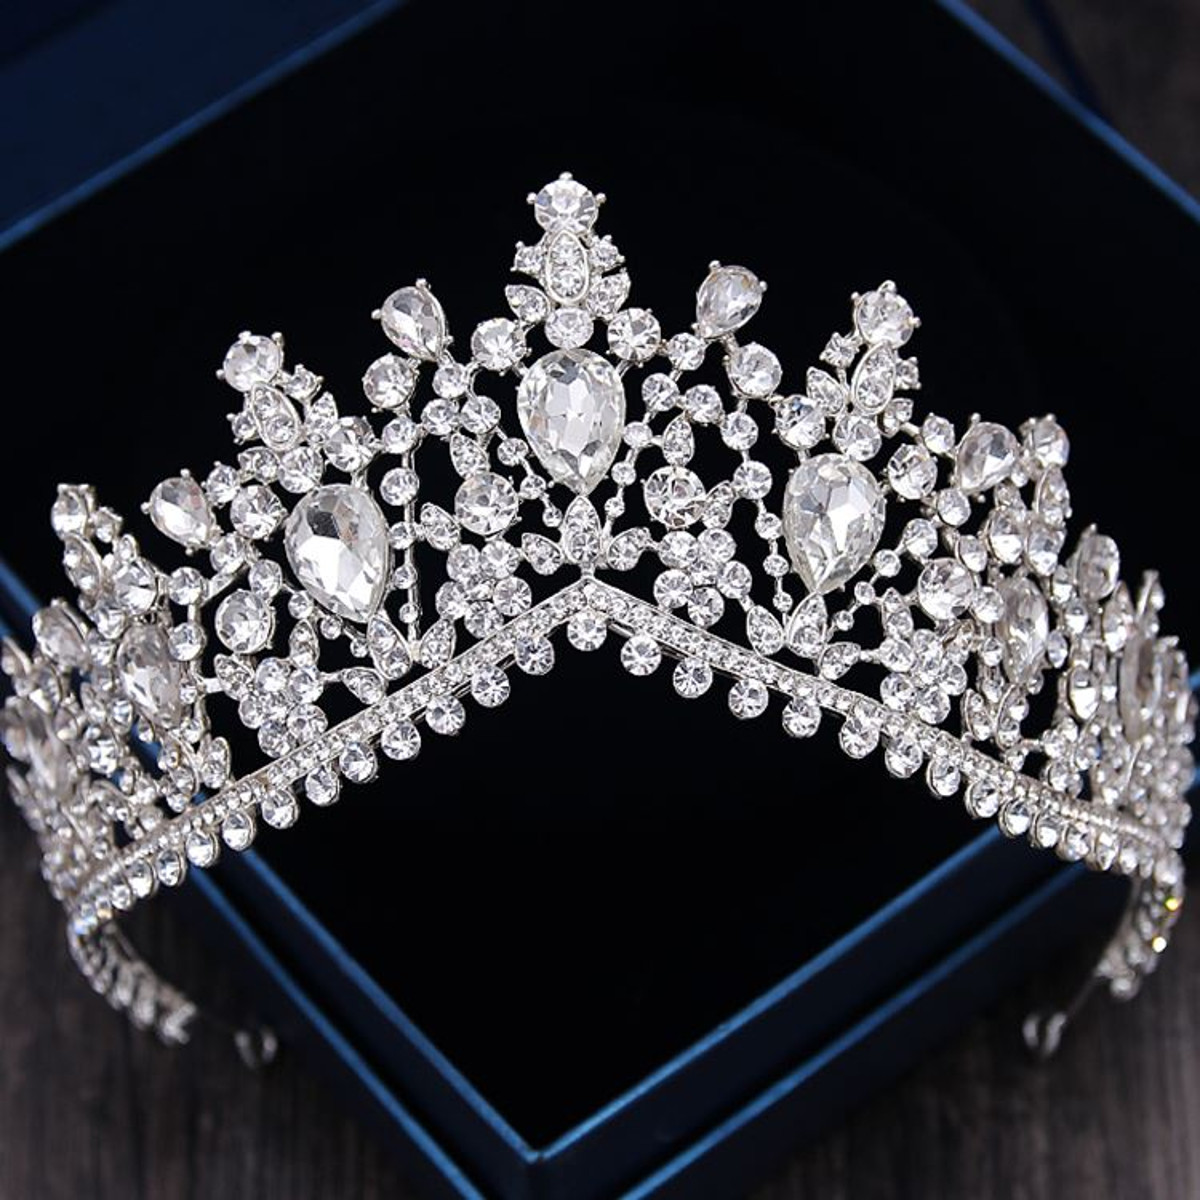 7cm-High-Large-Adult-Drip-Crystal-Wedding-Bridal-Party-Pageant-Prom-Tiara-Crown-Hair-Accessories-1364647